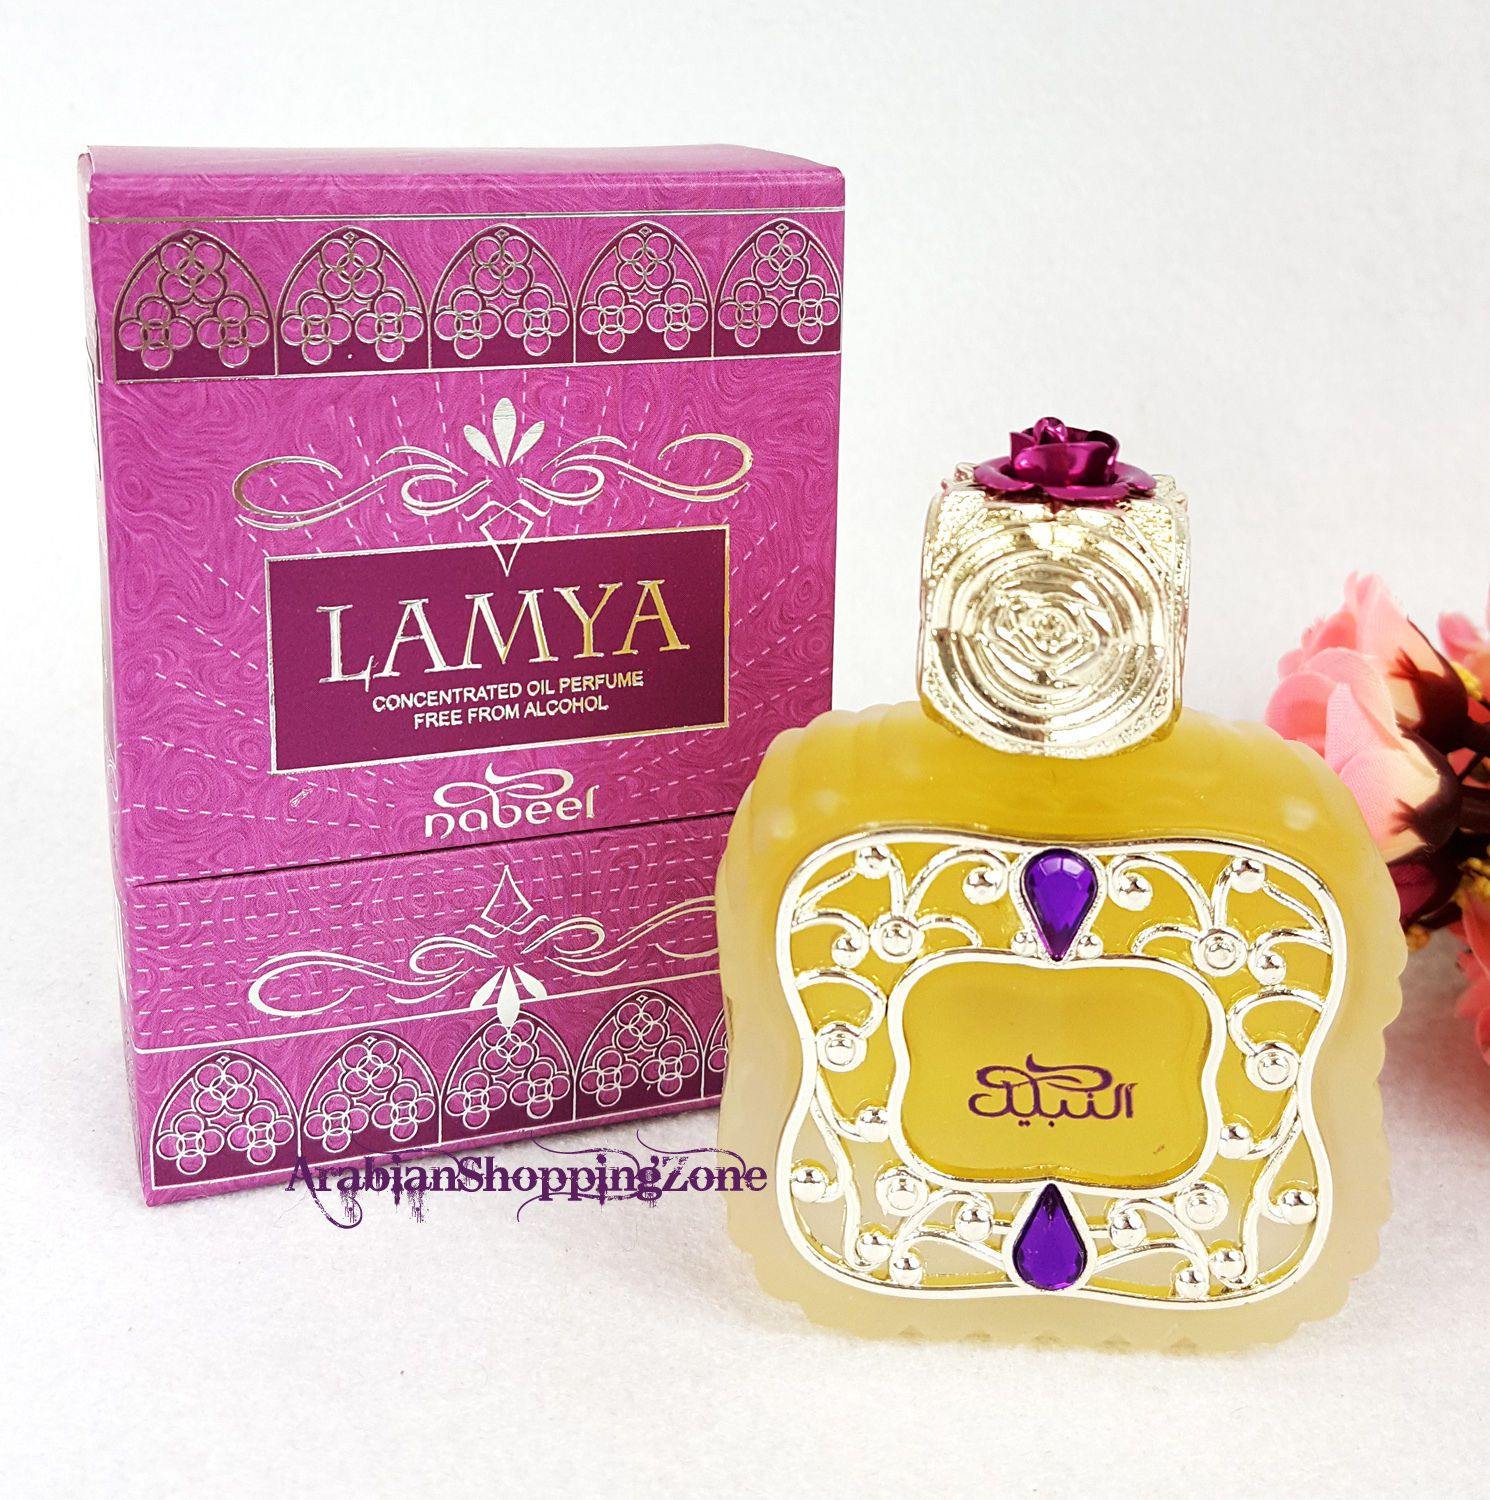 Lamya by Nabeel 20ml Concentrated Oil Perfume Free from Alcohol - Arabian Shopping Zone